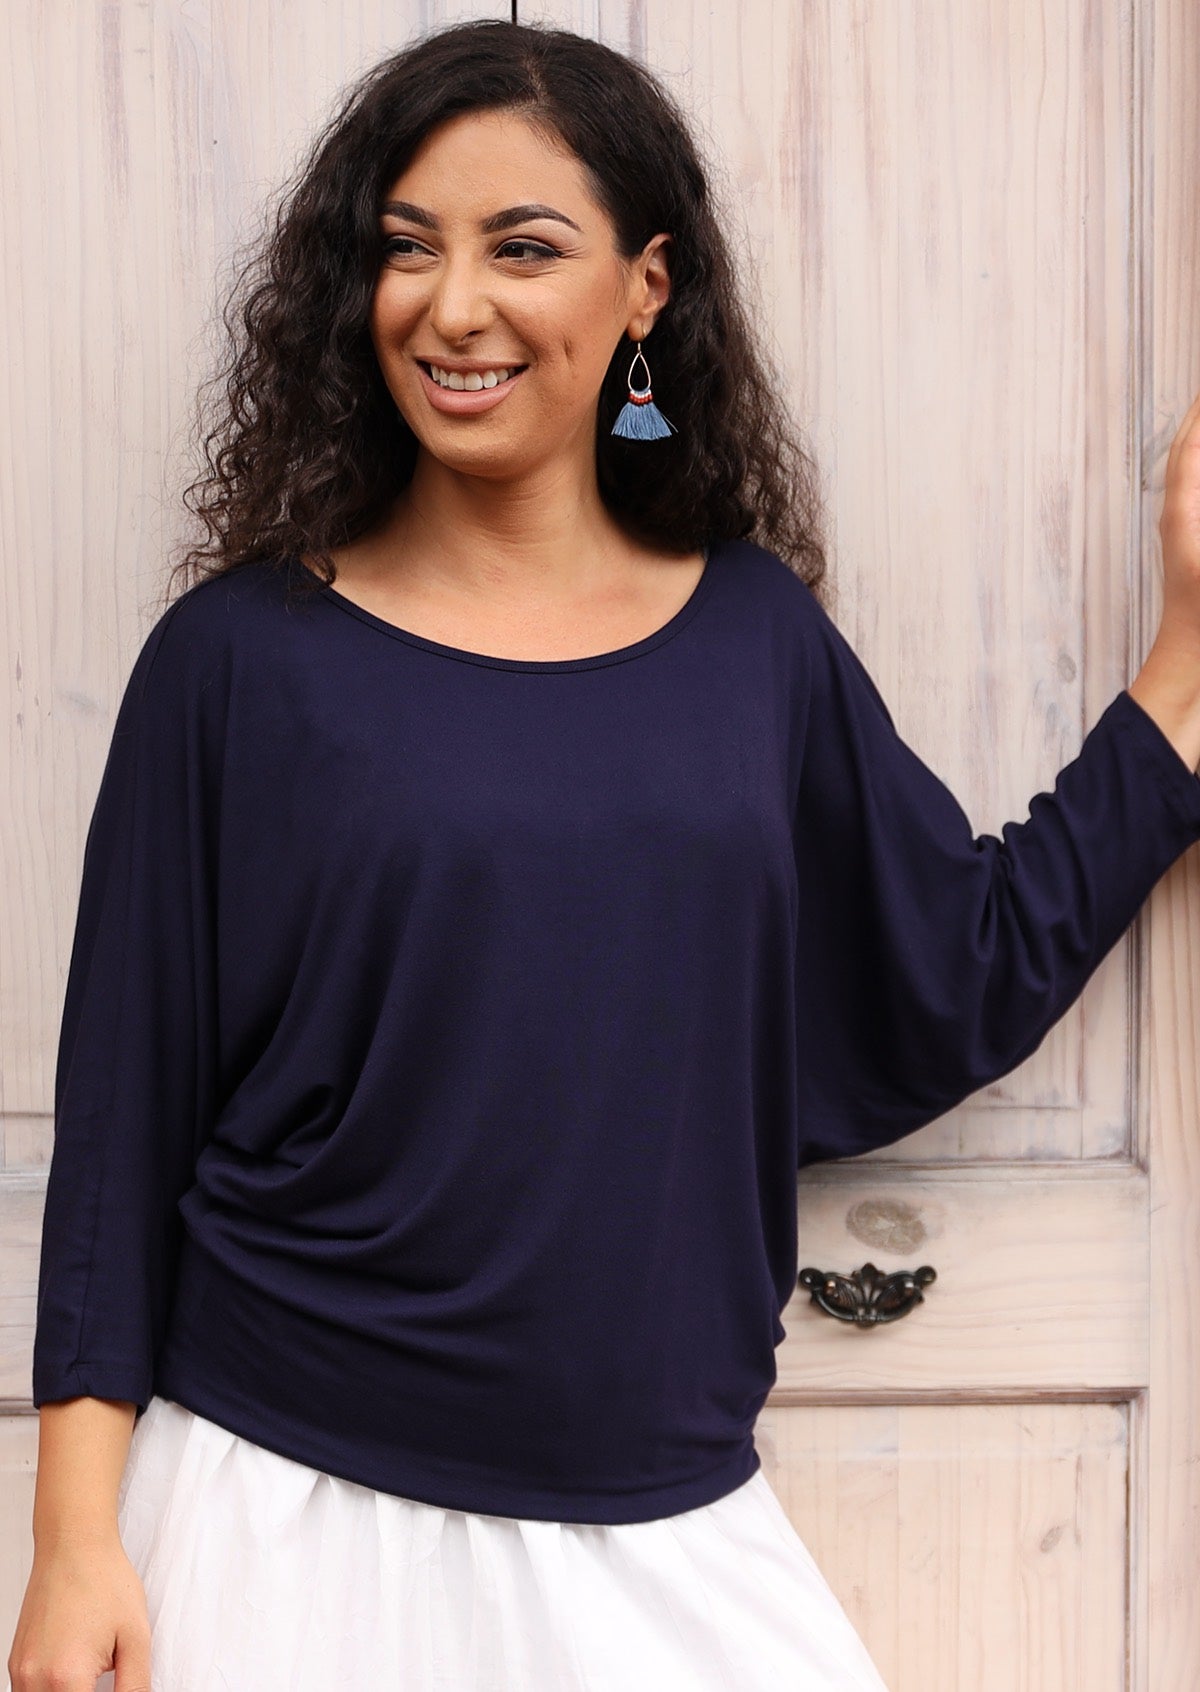 Woman wearing a 3/4 sleeve rayon batwing round neckline navy blue top with a white skirt.